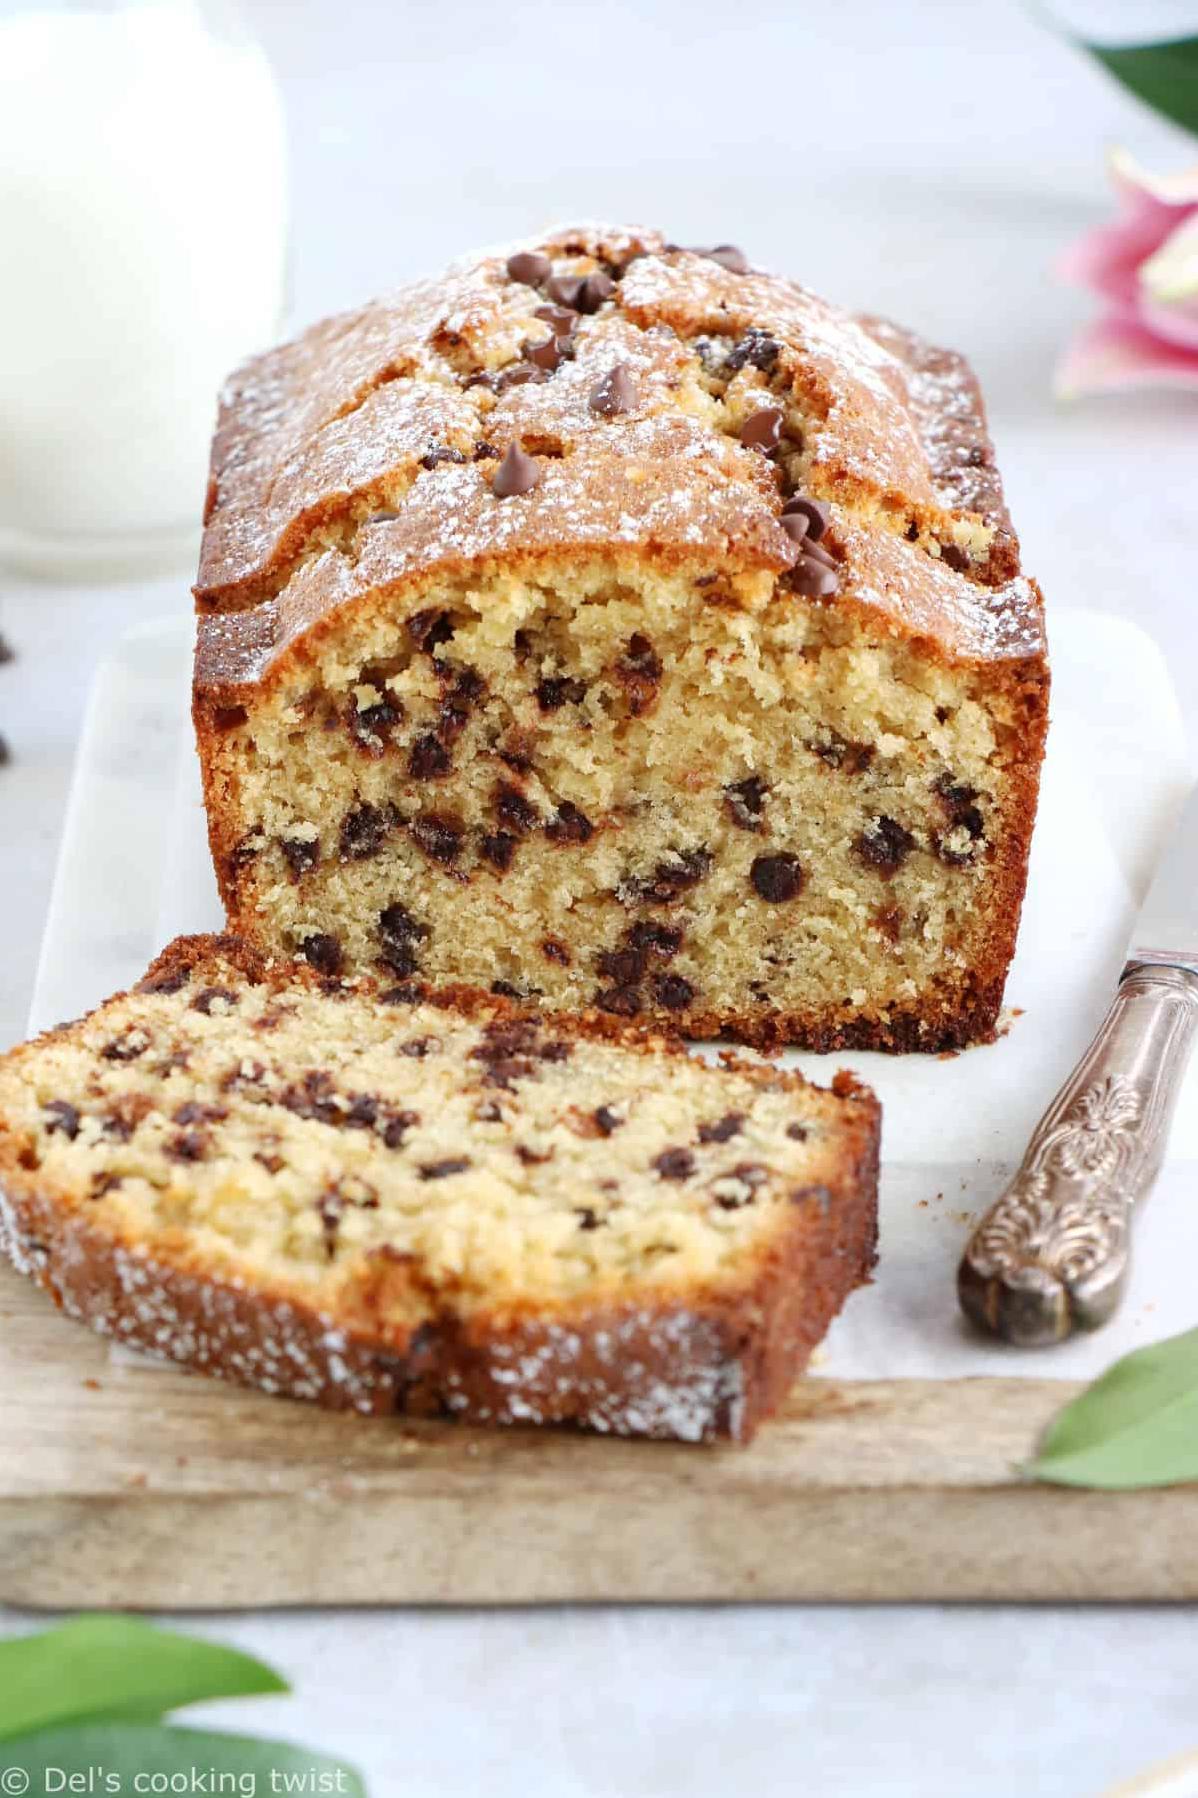  Simple ingredients and easy steps, this recipe is perfect for baking beginners.